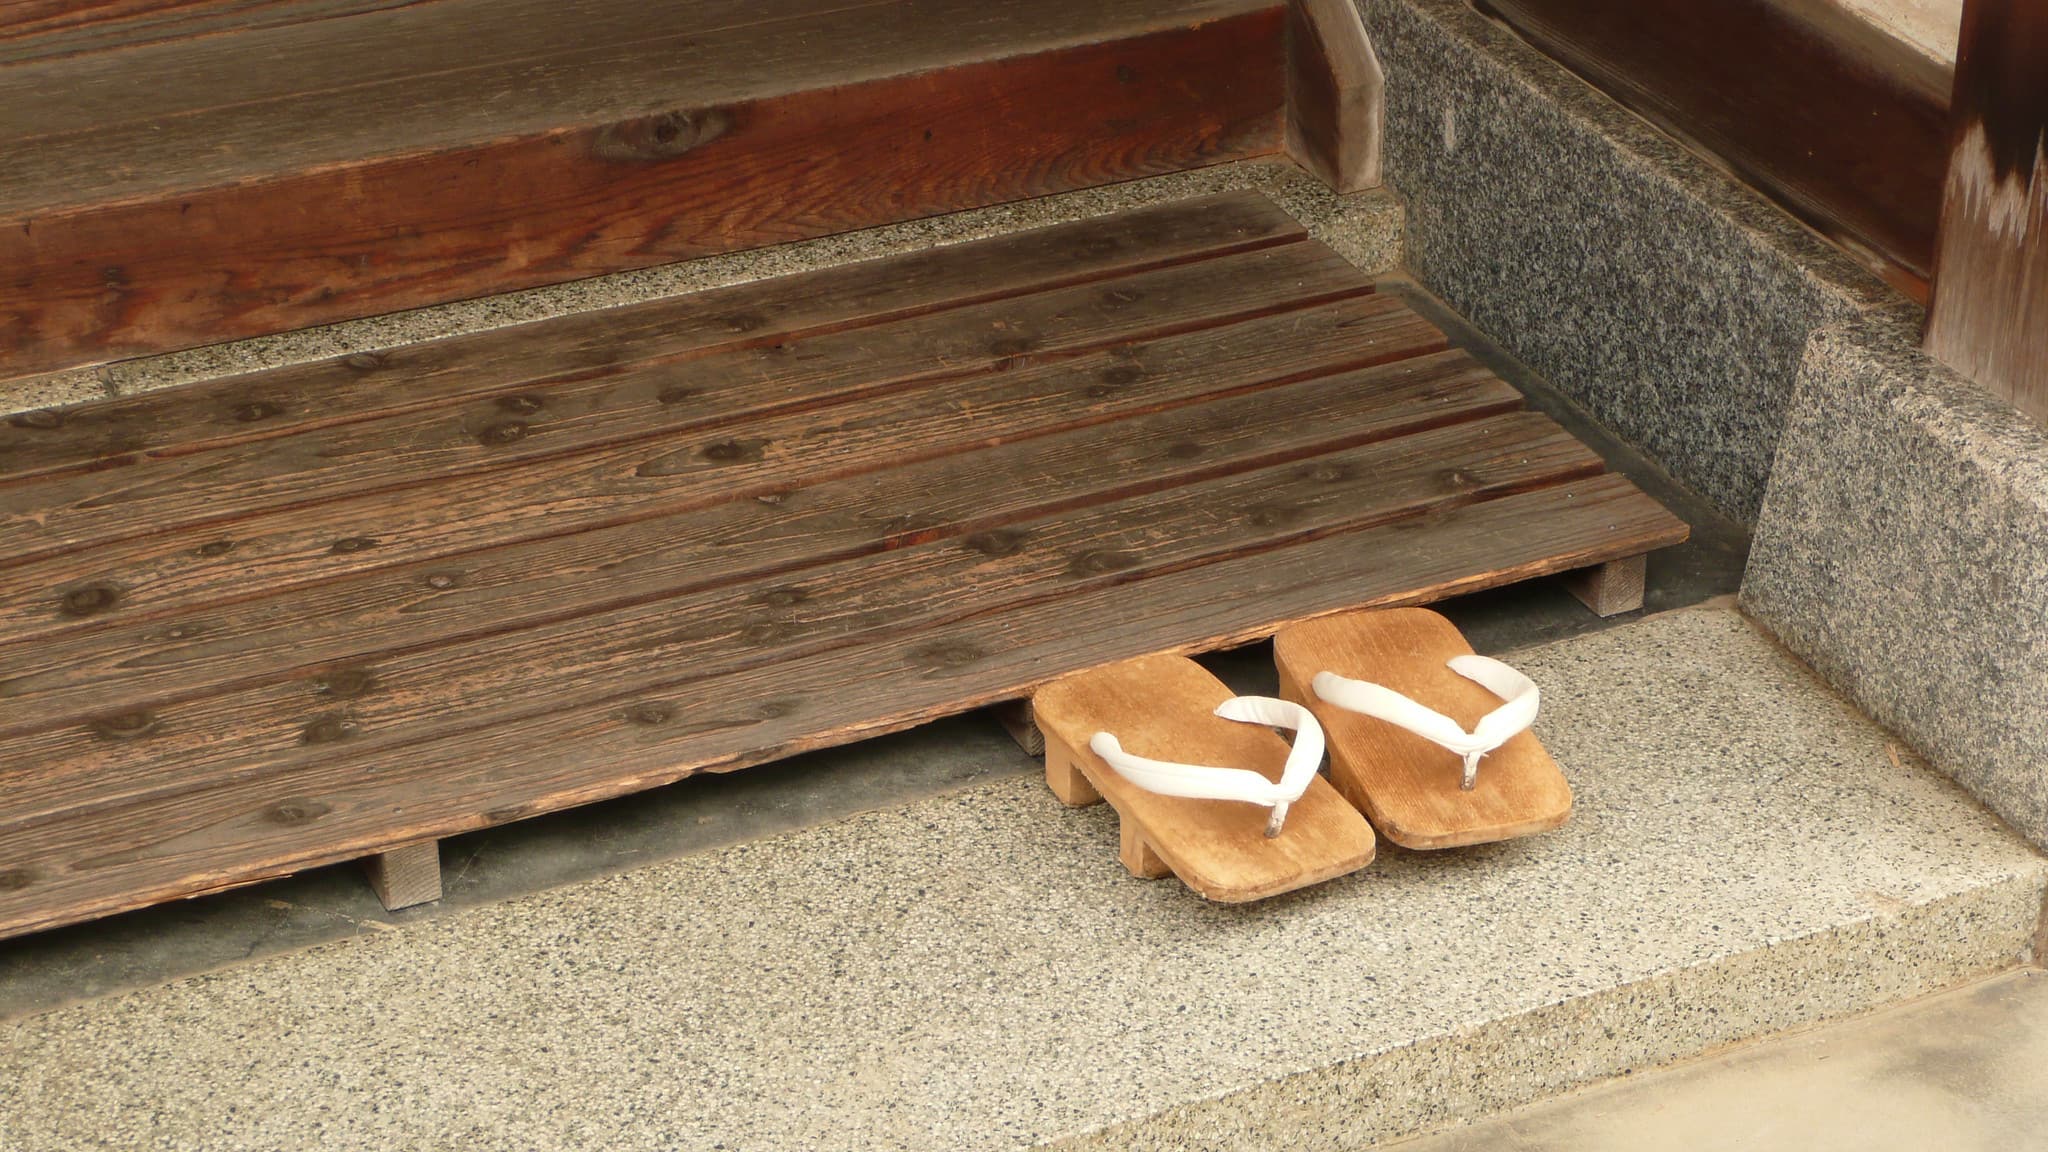 a pair of slippers for guests at a doorstep in japan